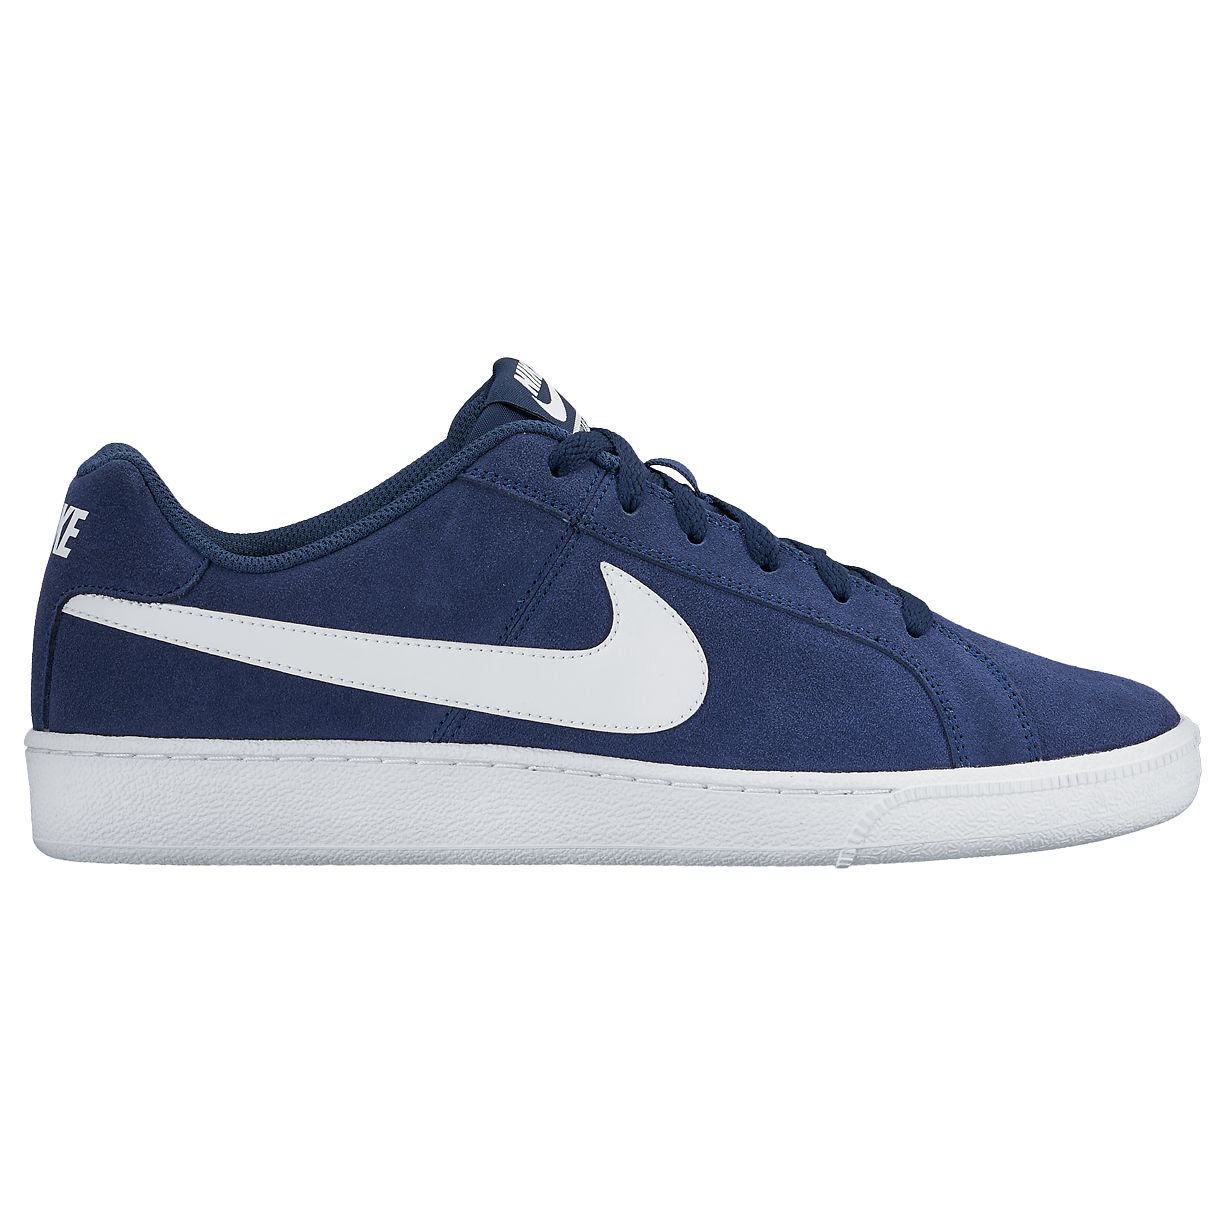 Nike Court Royale Suede Men's Trainer 